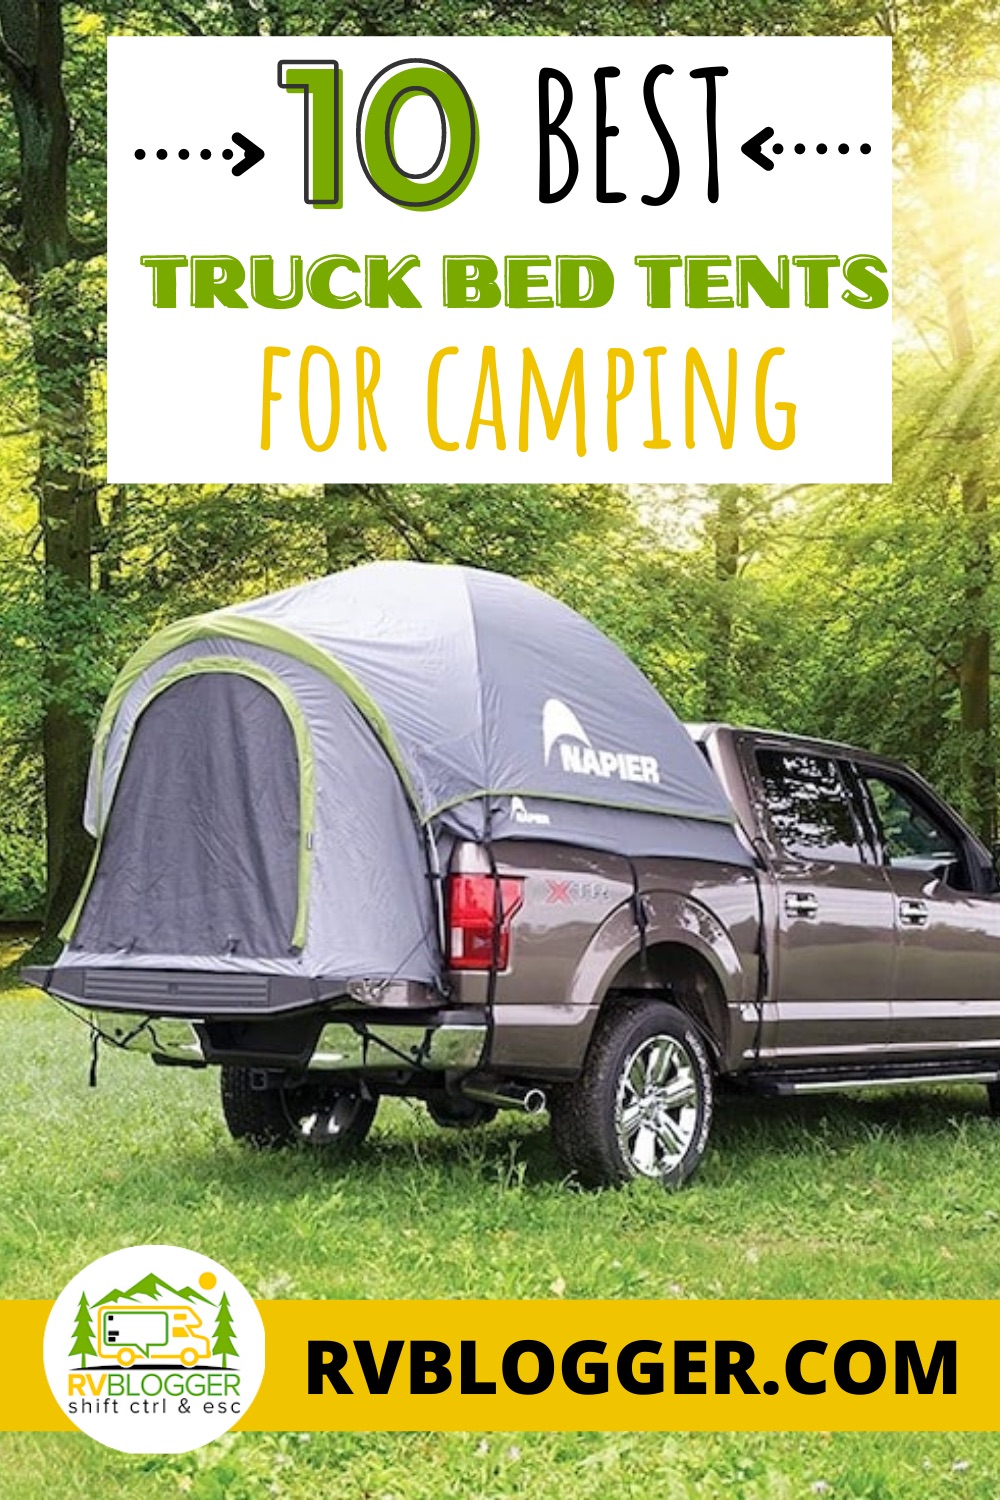 10 Best Truck Bed Tents for Camping – RVBlogger